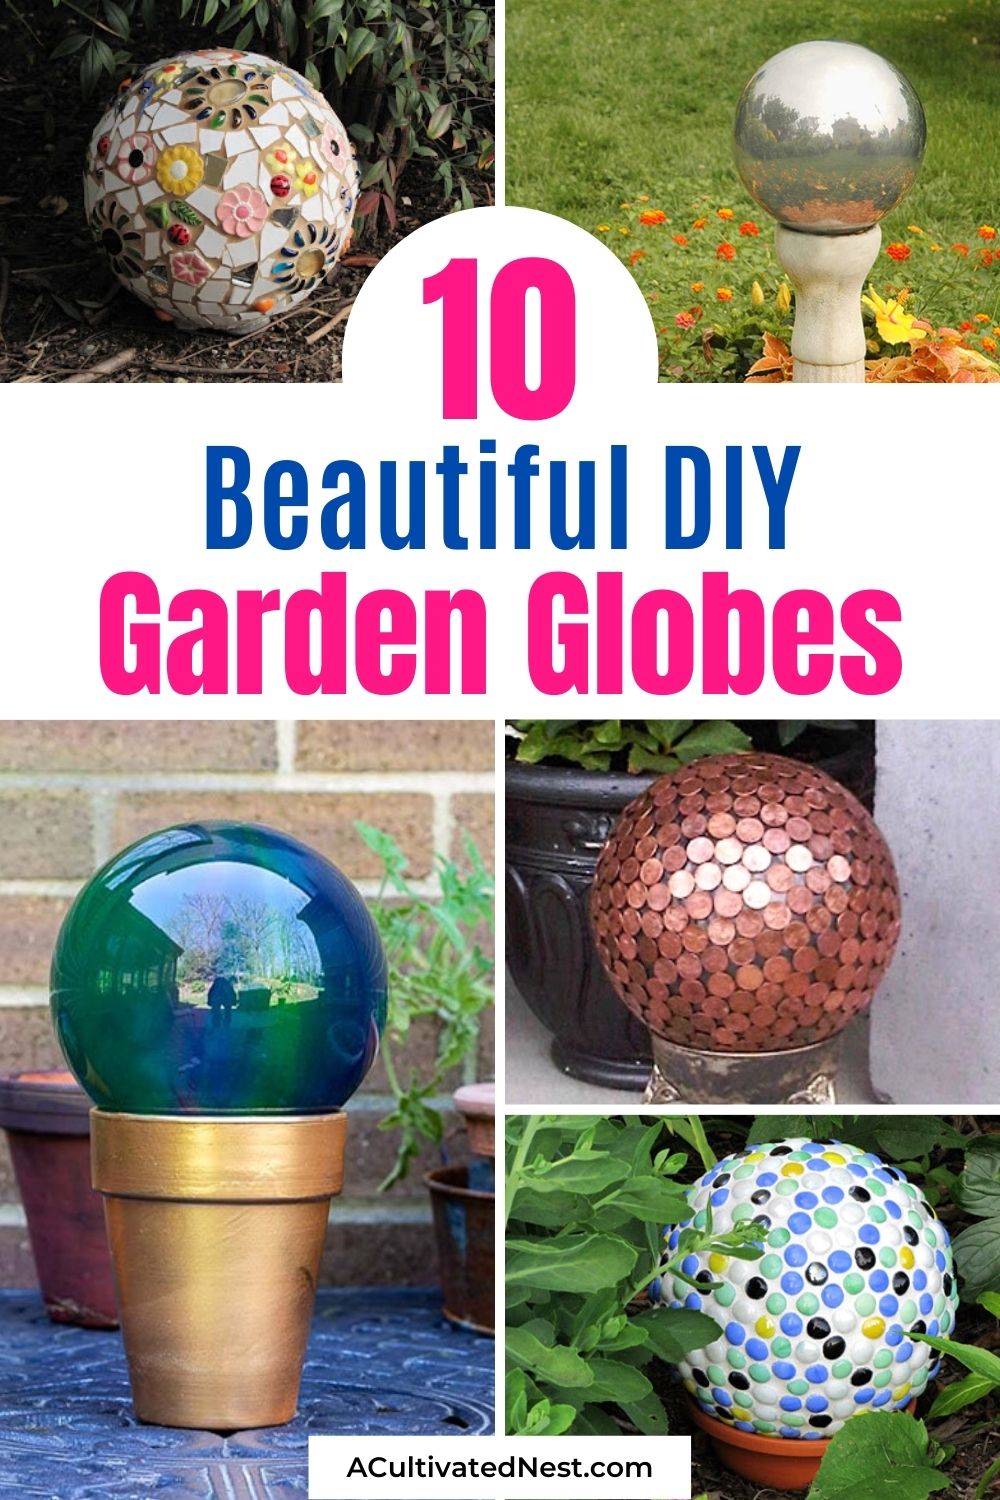 10 Beautiful DIY Garden Globes- You can easily add a beautiful decorative touch to your garden or yard by making your own lovely DIY garden globes! They're so easy and fun to make! | #diyProject #garden #gardenGlobes #gazingGlobes #ACultivatedNest